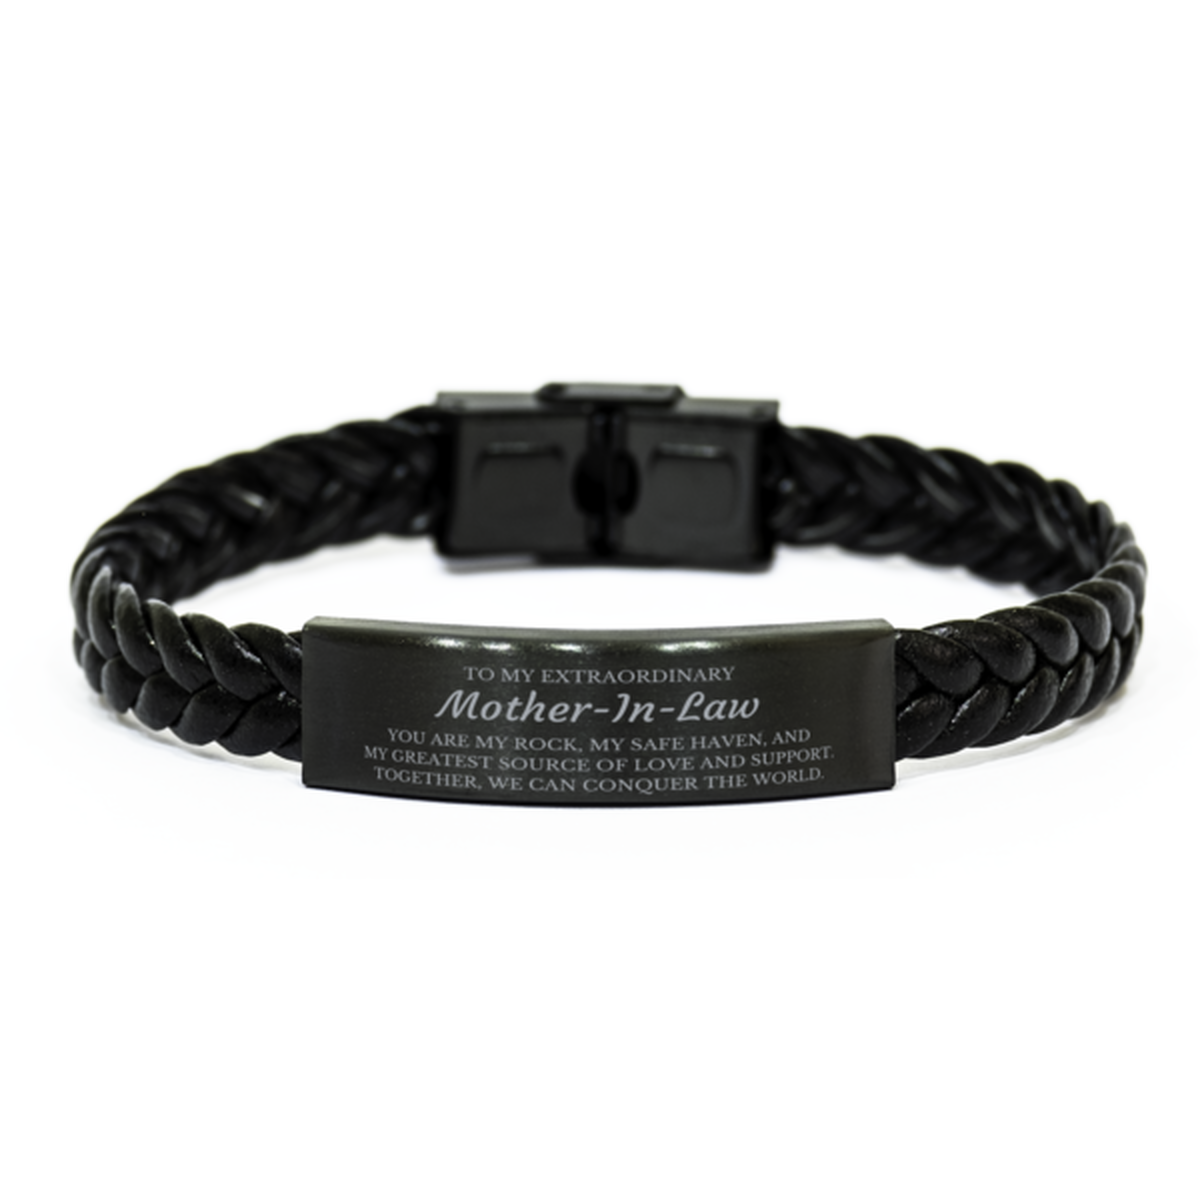 To My Extraordinary Mother-In-Law Gifts, Together, we can conquer the world, Birthday Braided Leather Bracelet For Mother-In-Law, Christmas Gifts For Mother-In-Law